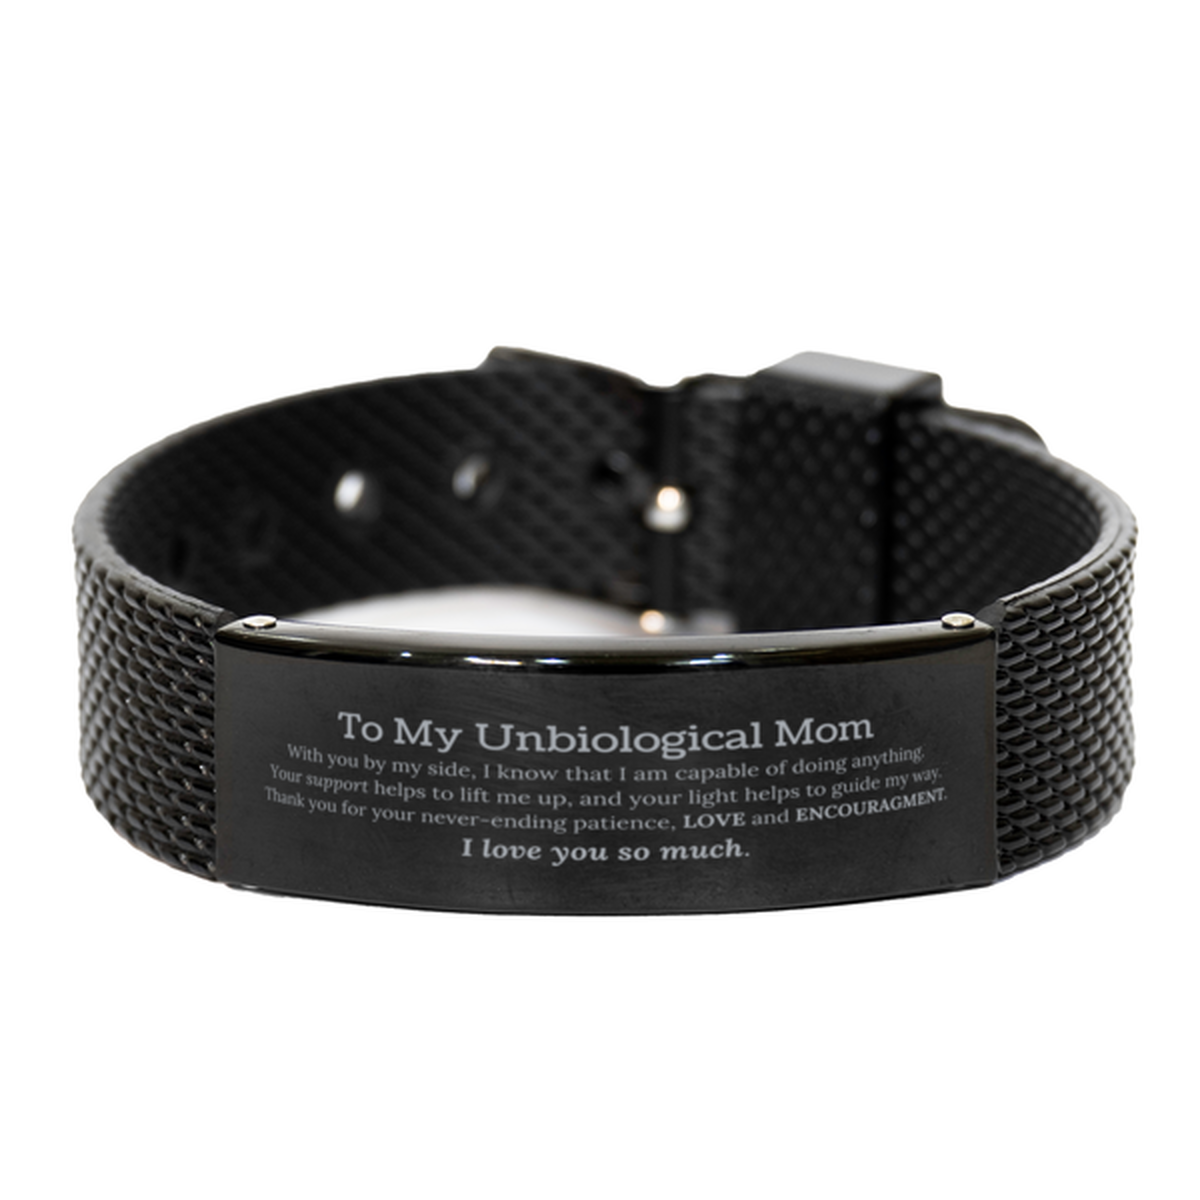 Appreciation Unbiological Mom Black Shark Mesh Bracelet Gifts, To My Unbiological Mom Birthday Christmas Wedding Keepsake Gifts for Unbiological Mom With you by my side, I know that I am capable of doing anything. I love you so much